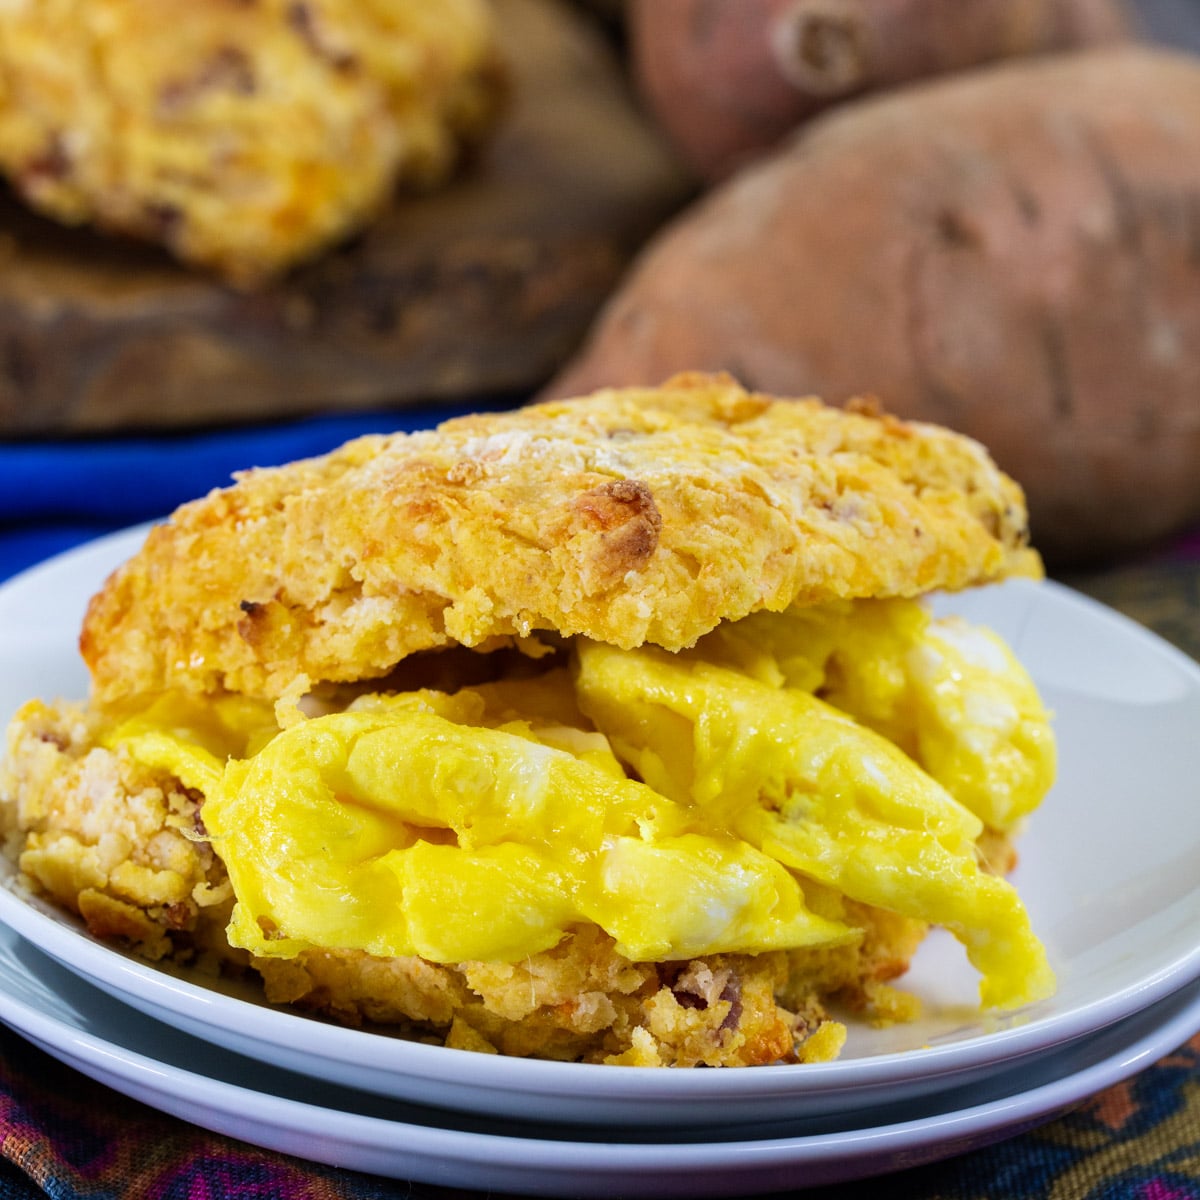 Sweet Potato Bacon Biscuit stuffed with scrambled egg.